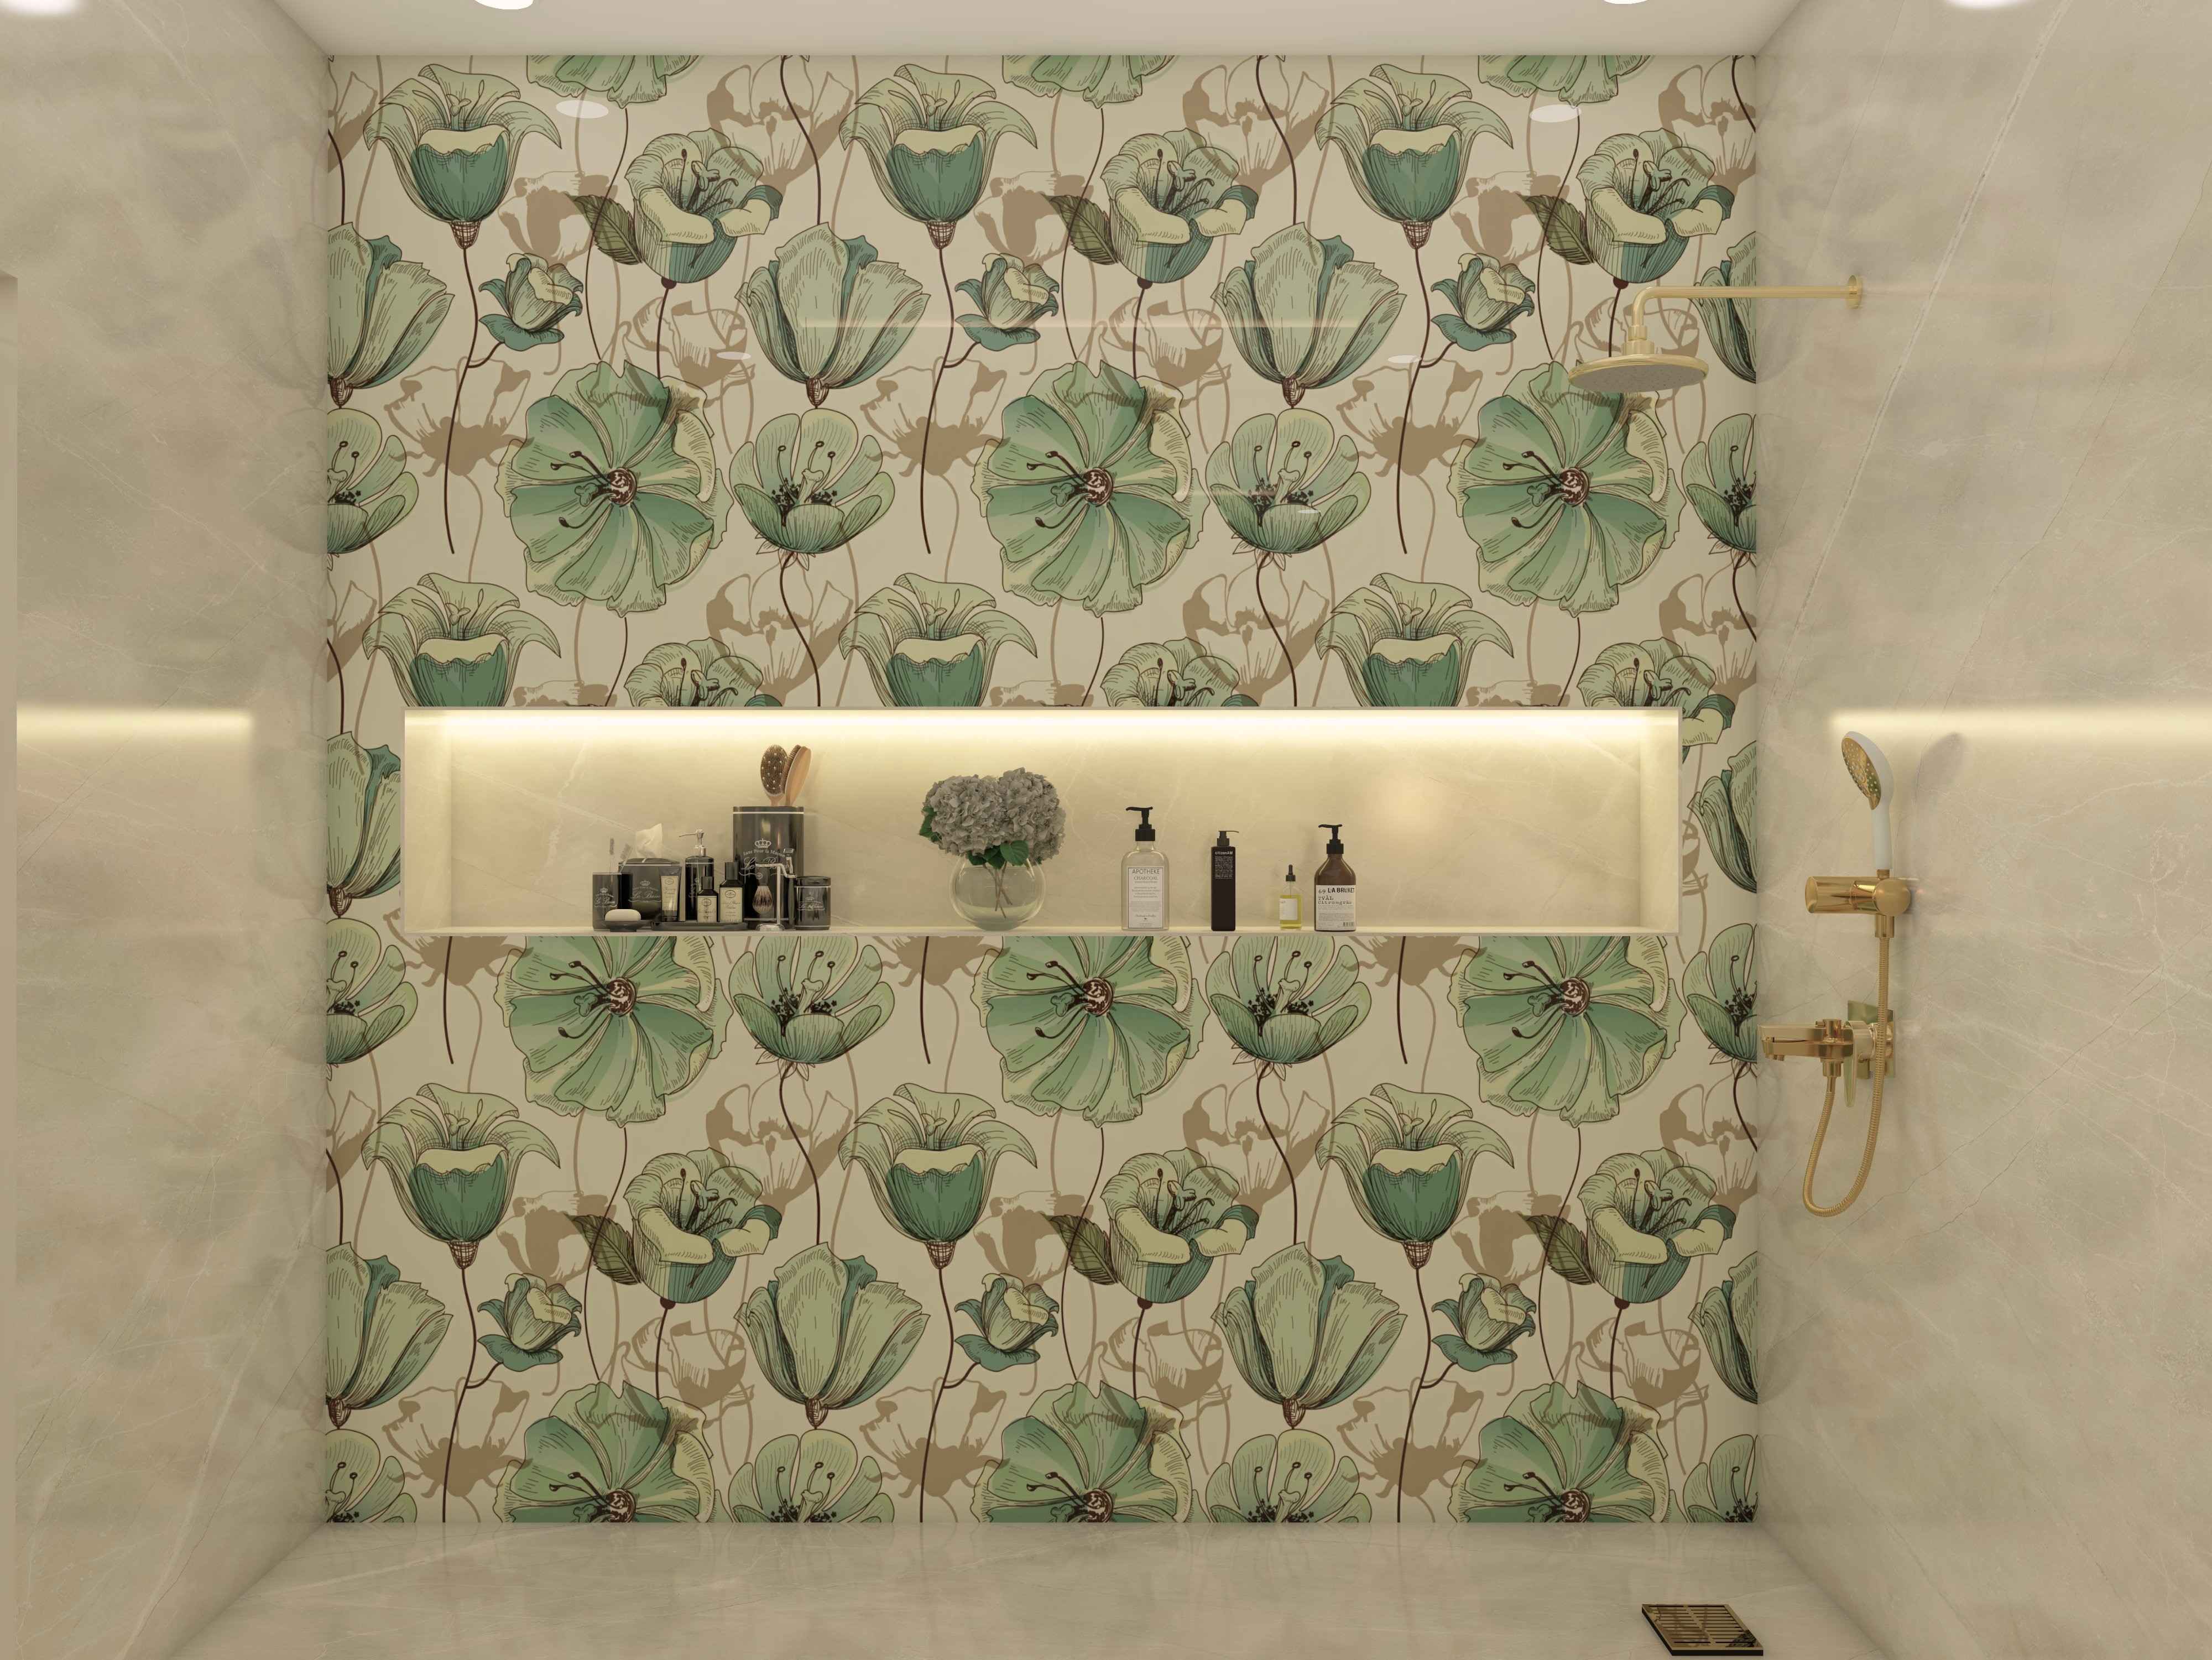 Bathroom tile design with Asian Paints tropical wallpaper patterned tiles - Beautiful Homes